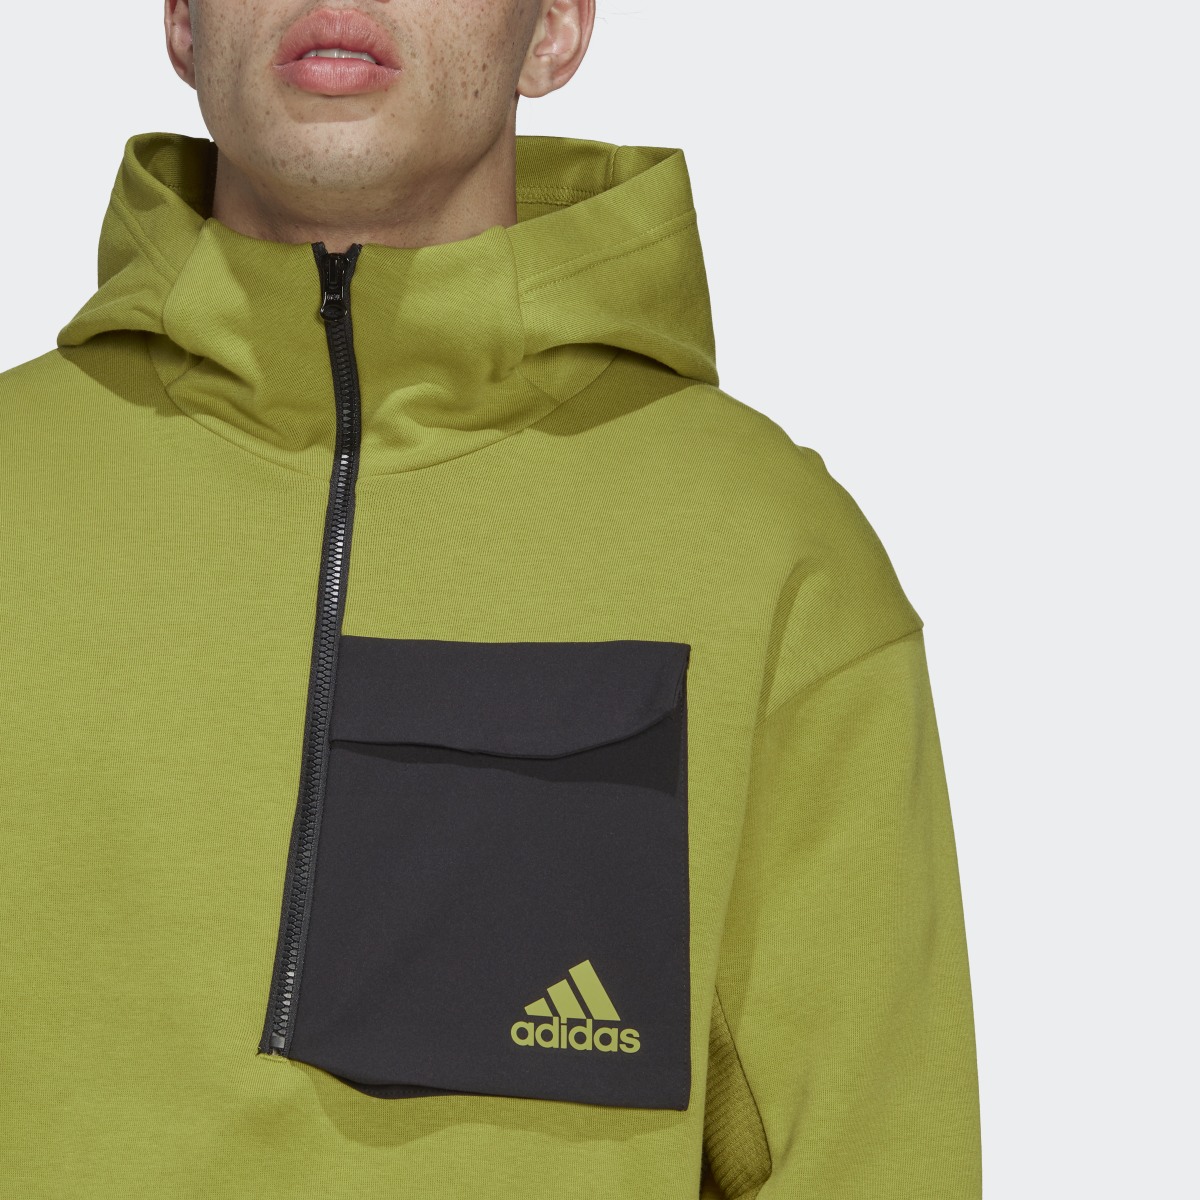 Adidas Designed for Gameday Hoodie. 6